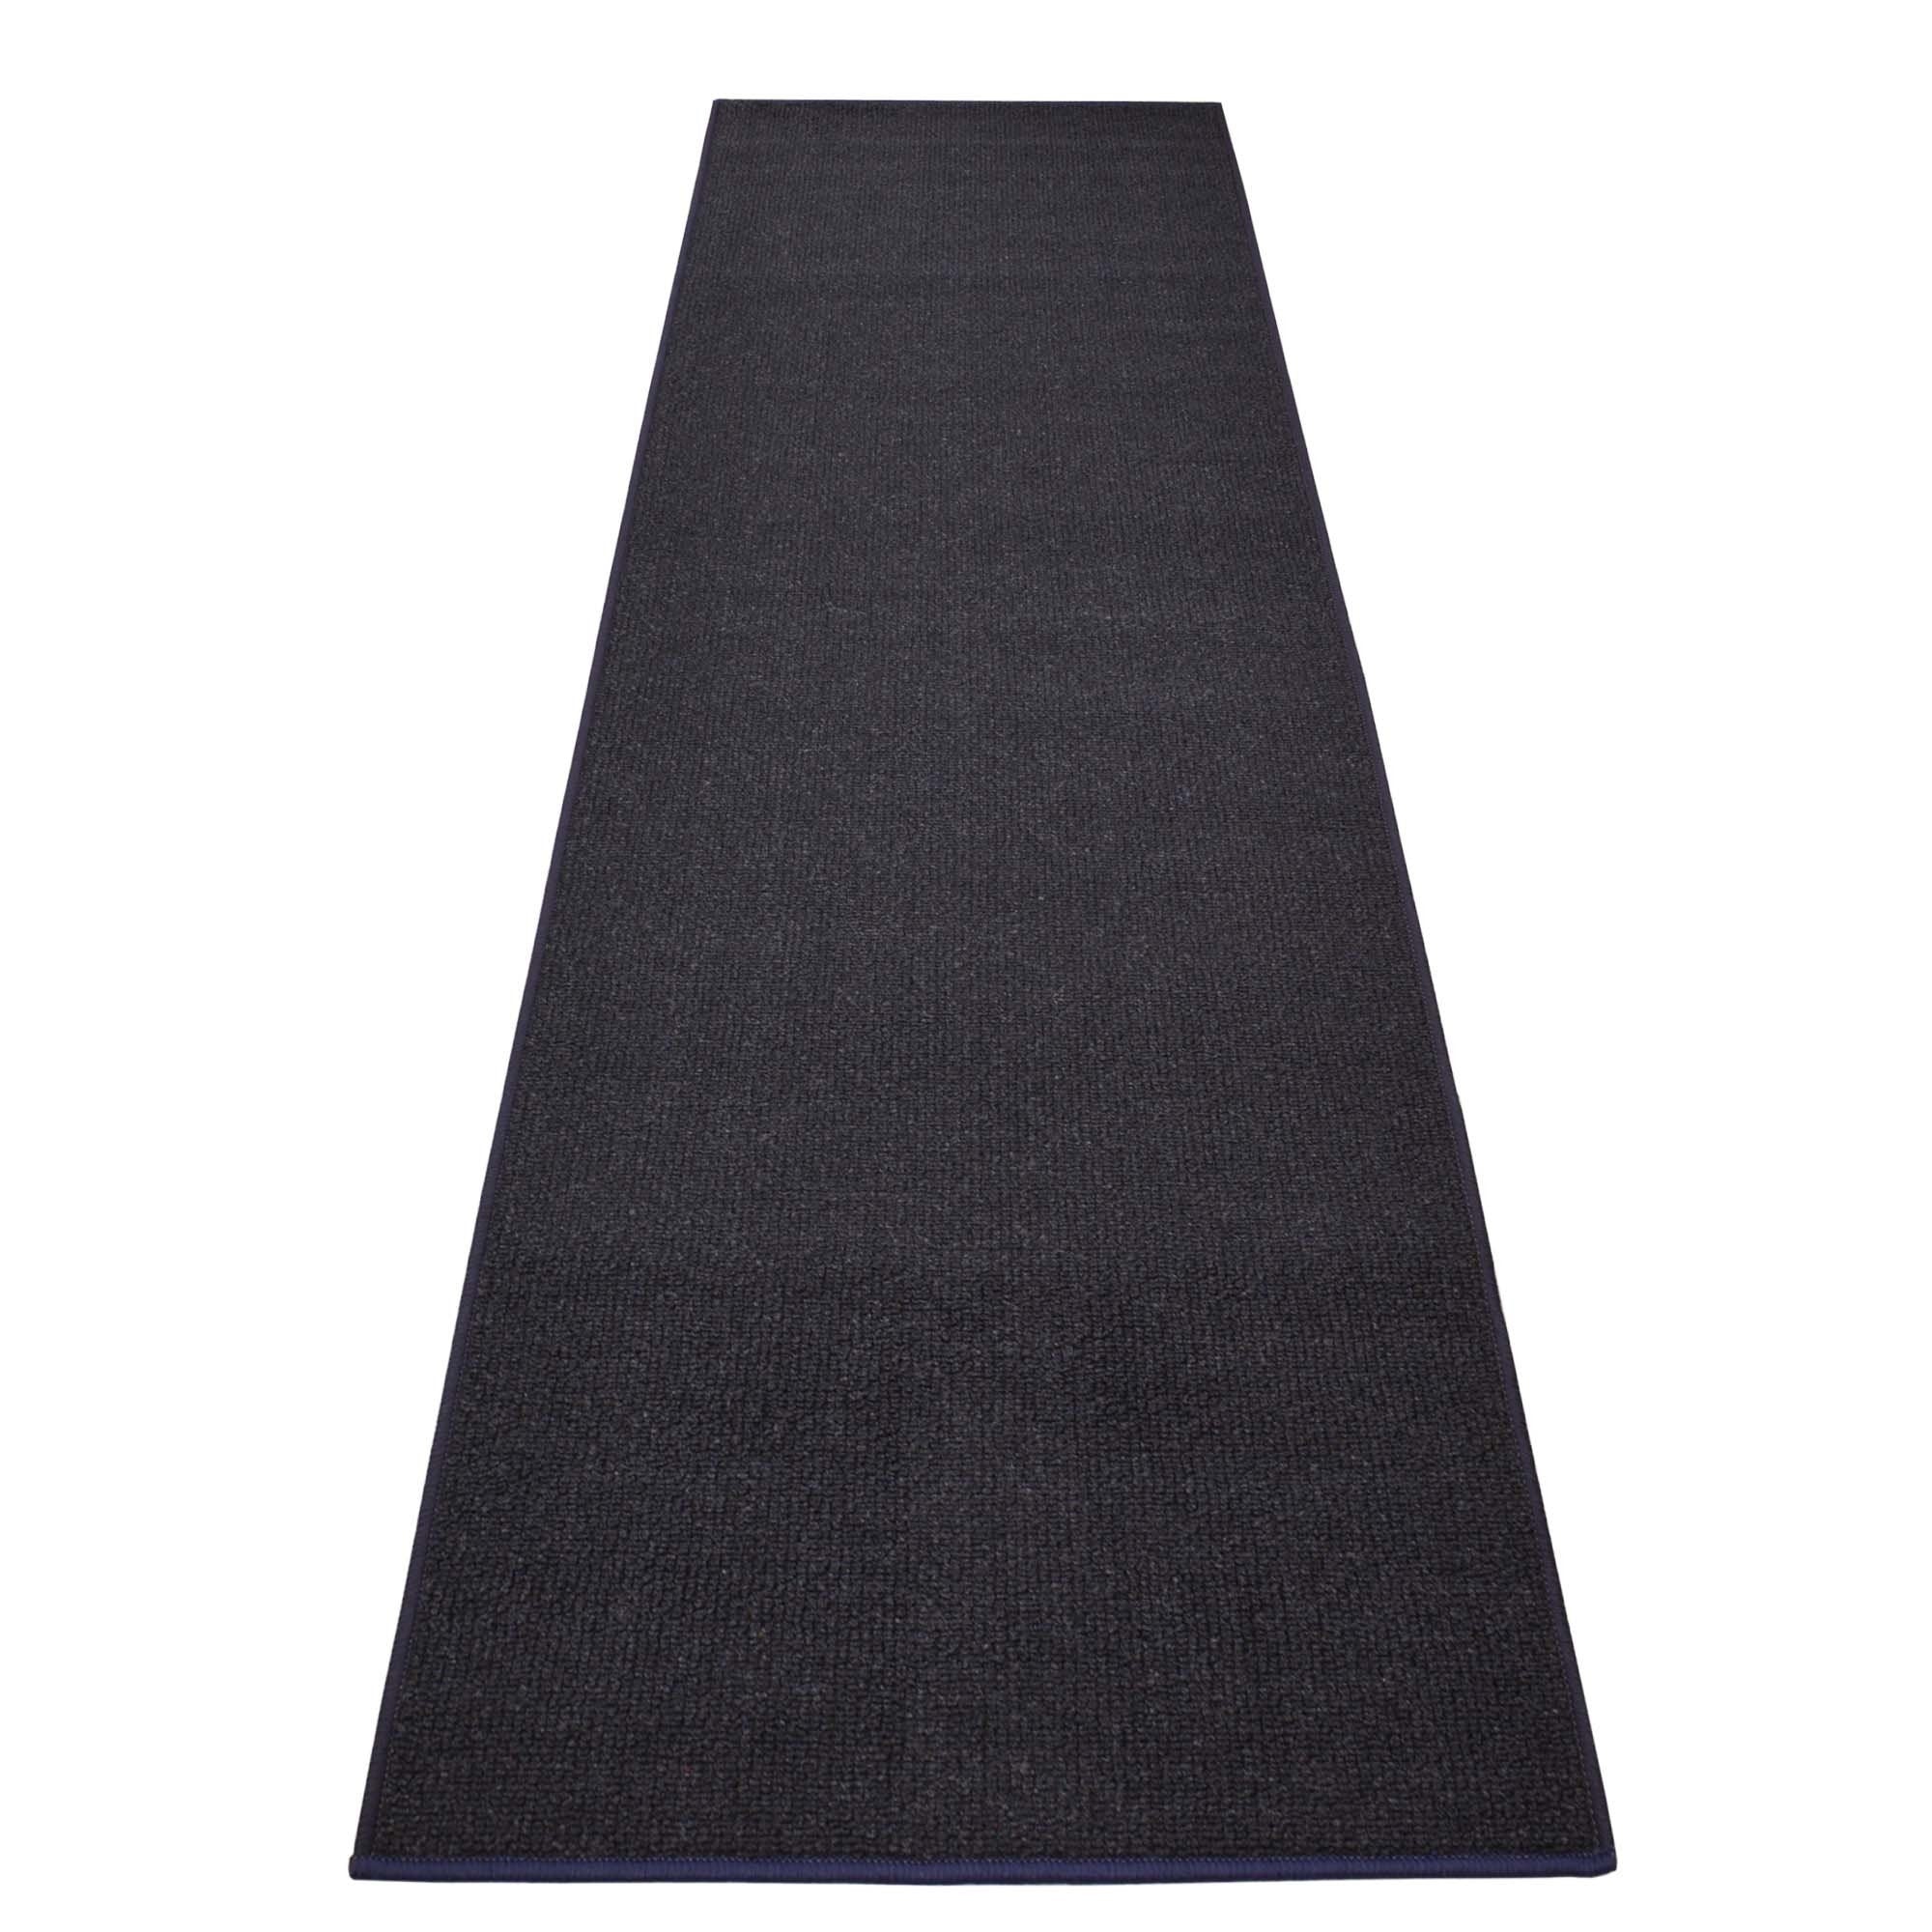 Machine Washable Custom Size Runner Rug Berber Solid Dark Navy Blue Skid Resistant Area Rug Runners Customize By Feet and 26 inch Width - 0